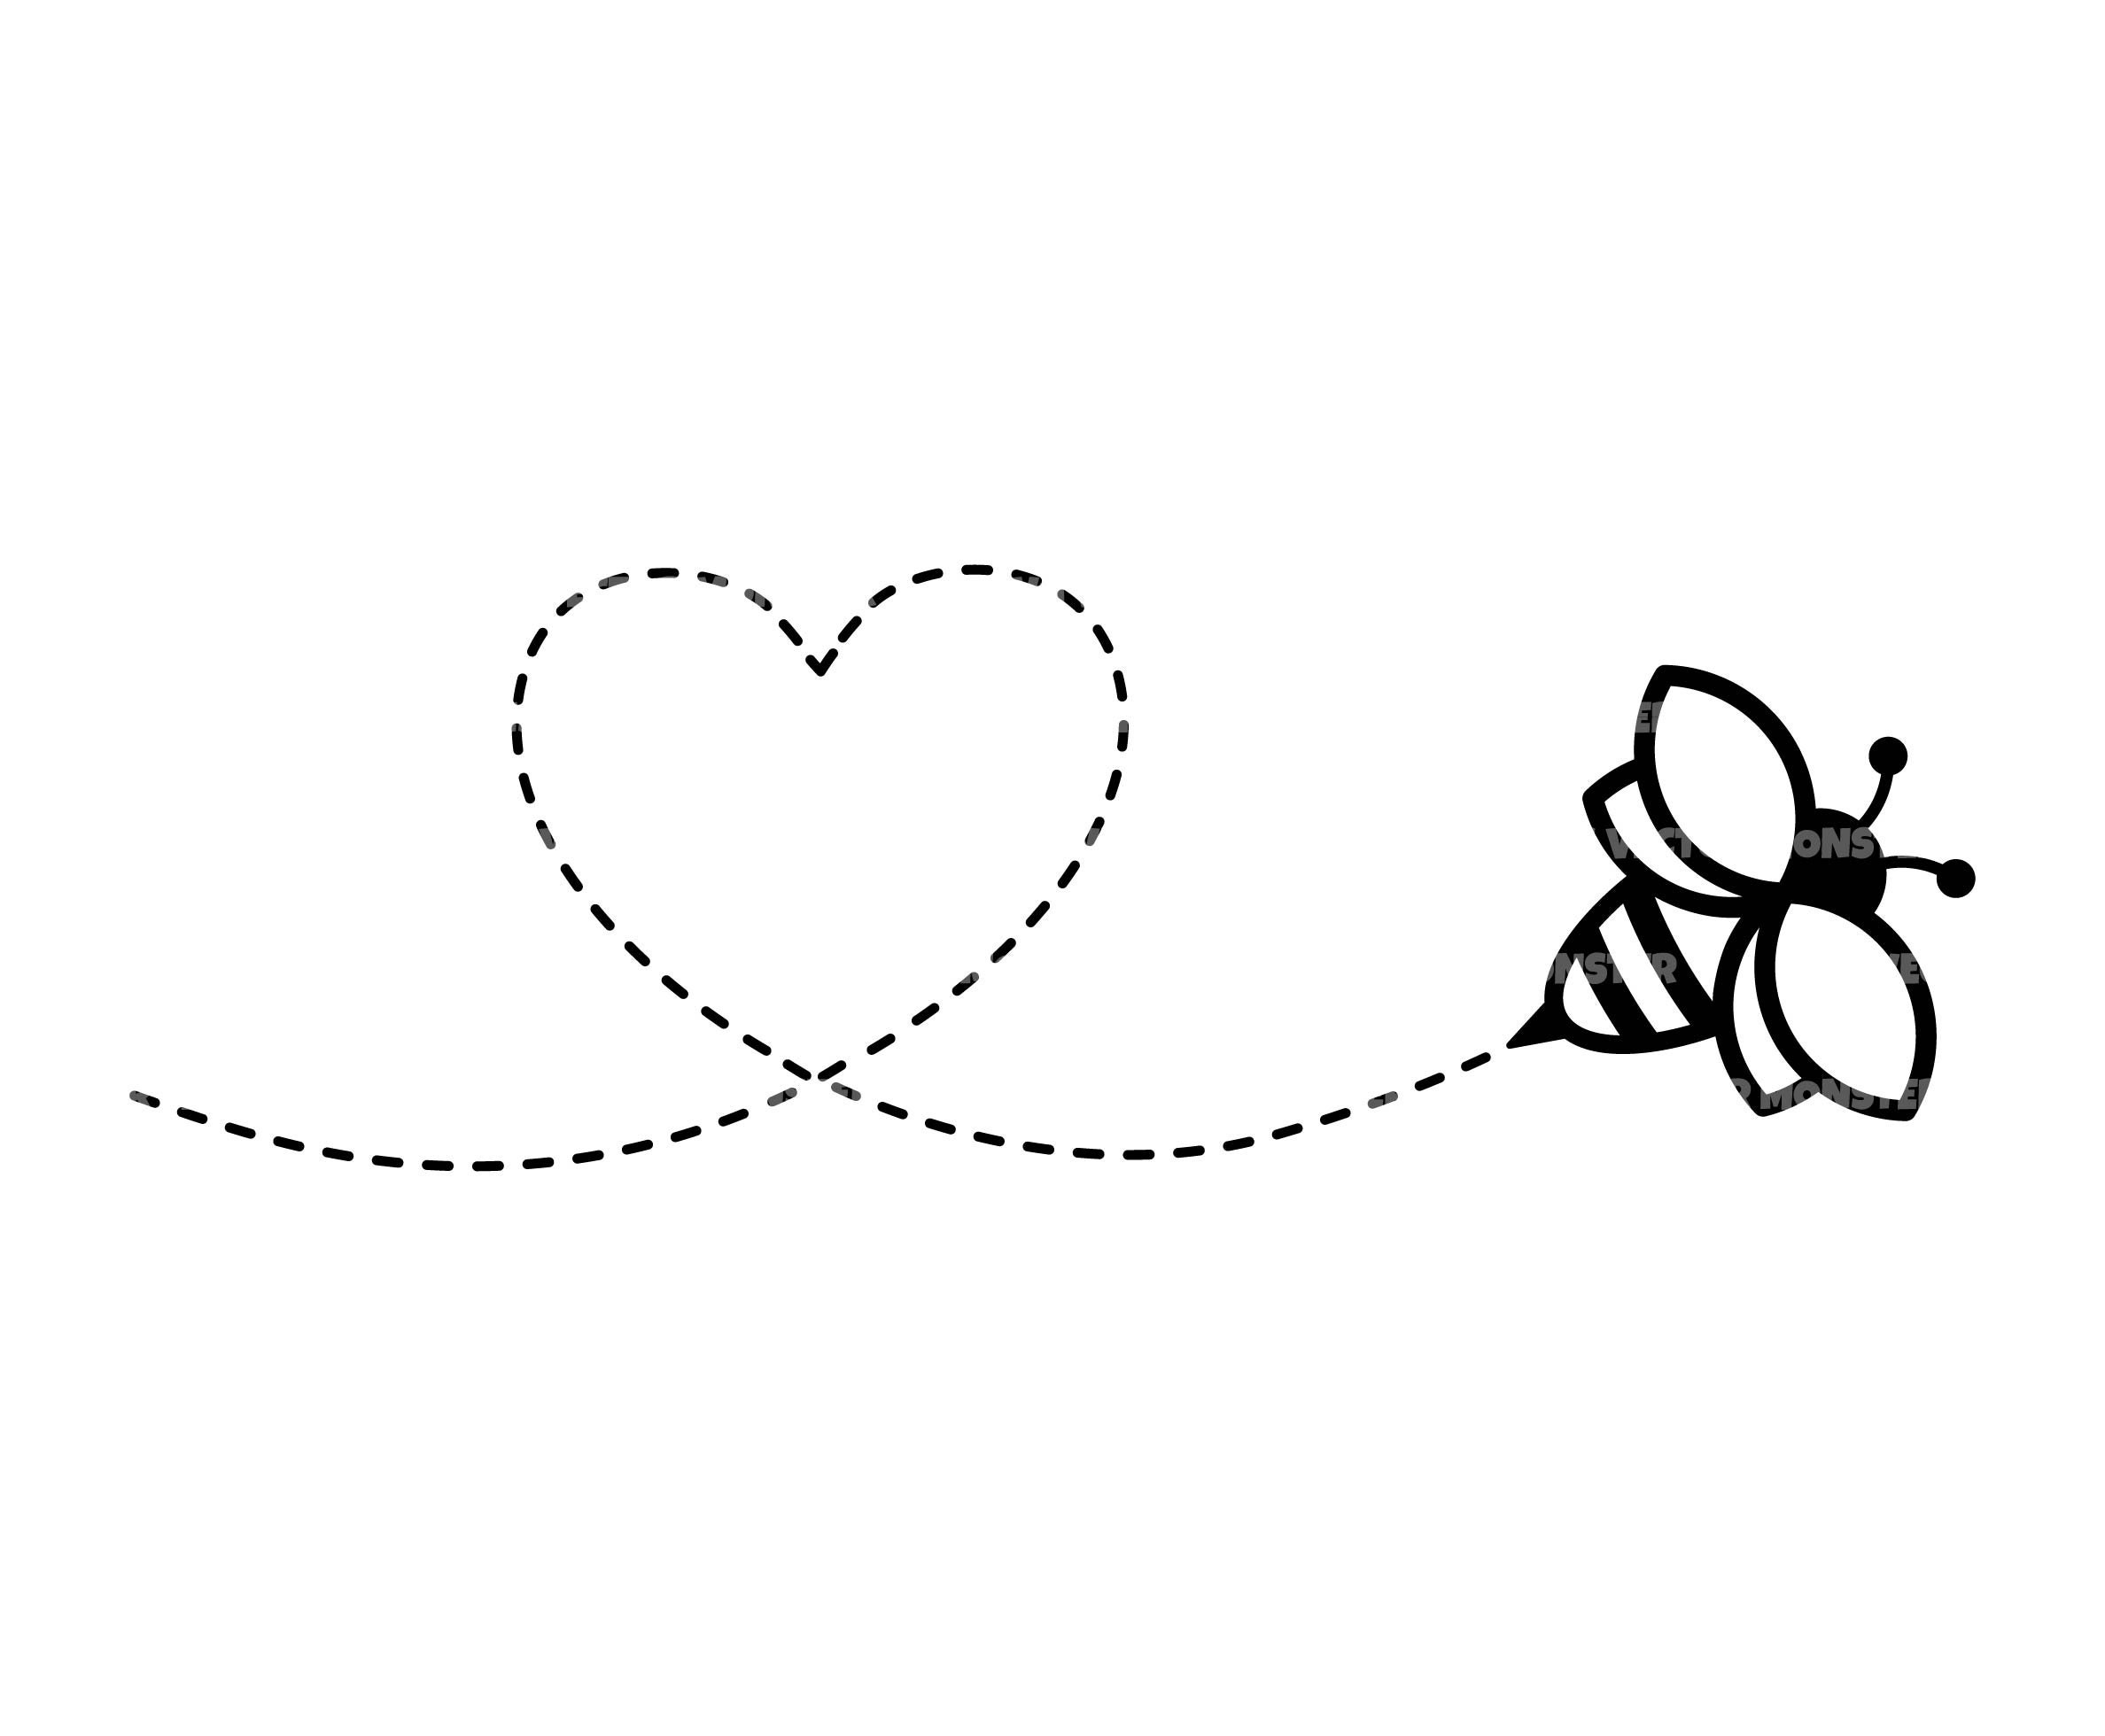 Bee Svg, Heart Dotted Line Svg, Honeybee, Bumblebee, Heart Trail, Heart  Path. Vector Cut file Cricut, Silhouette, Pdf Png Eps Dxf.